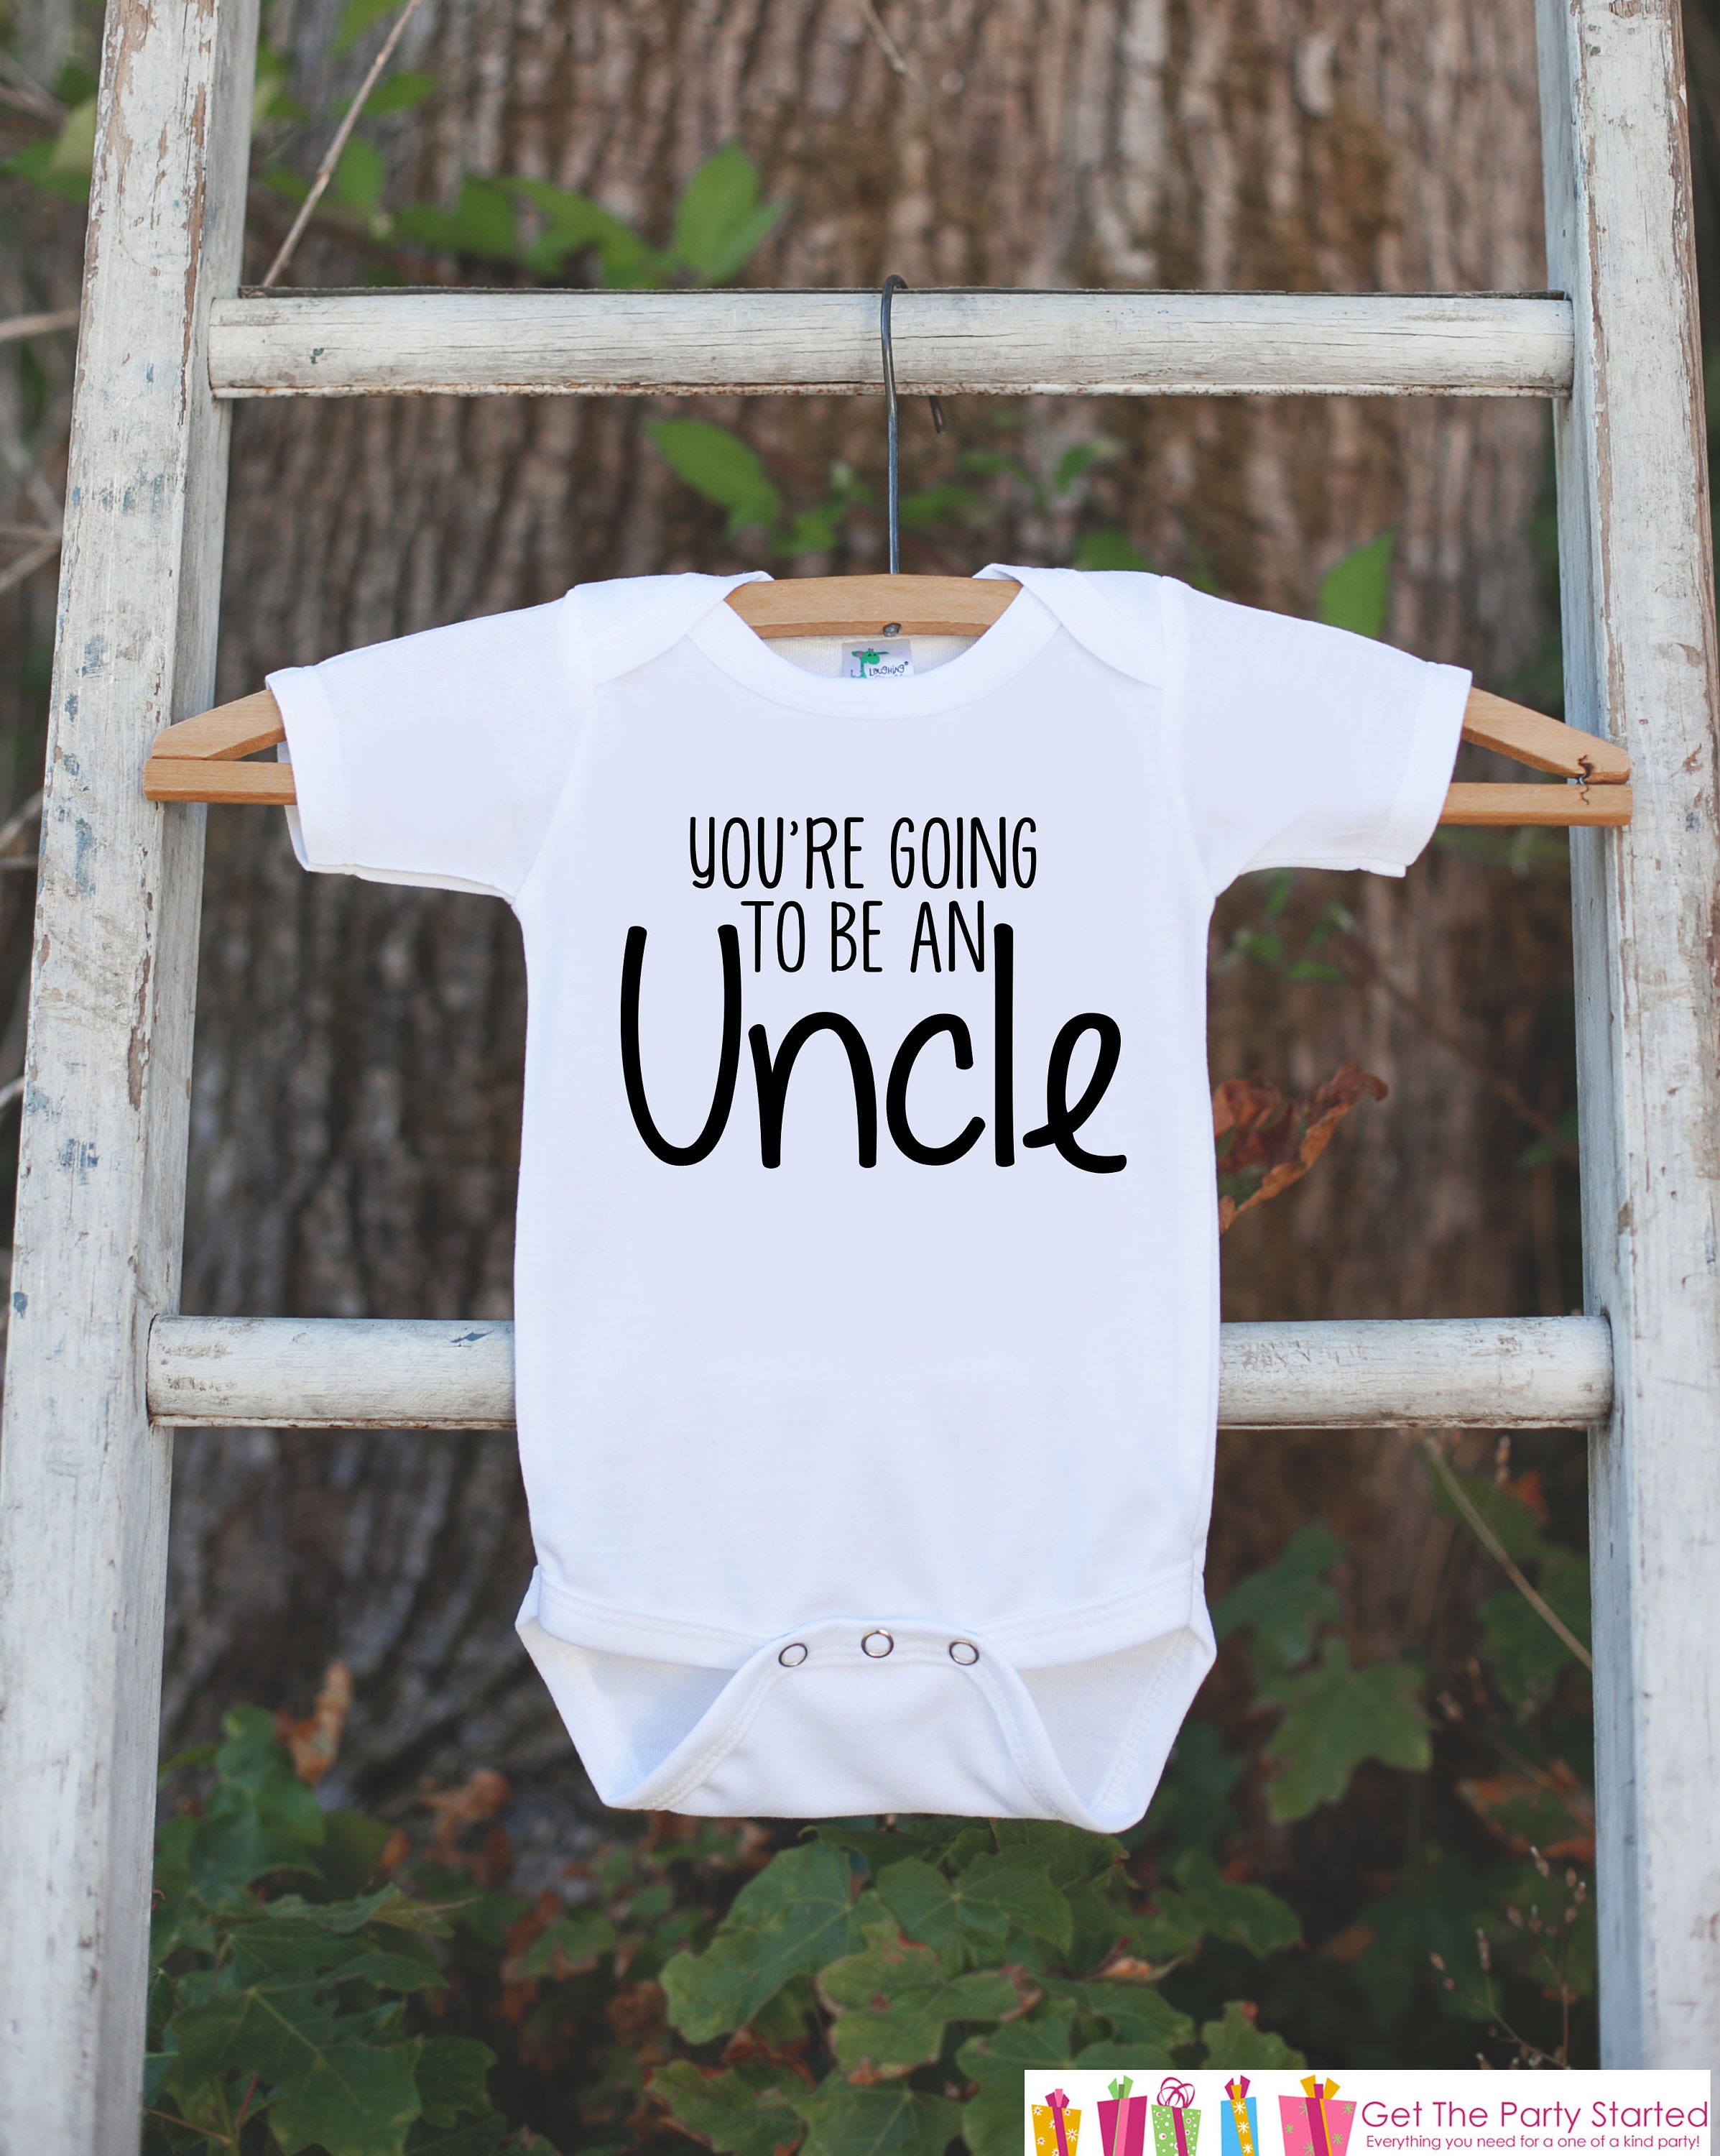 We Are Excited To Announce You're Going To Be An Uncle baby vest boys girls